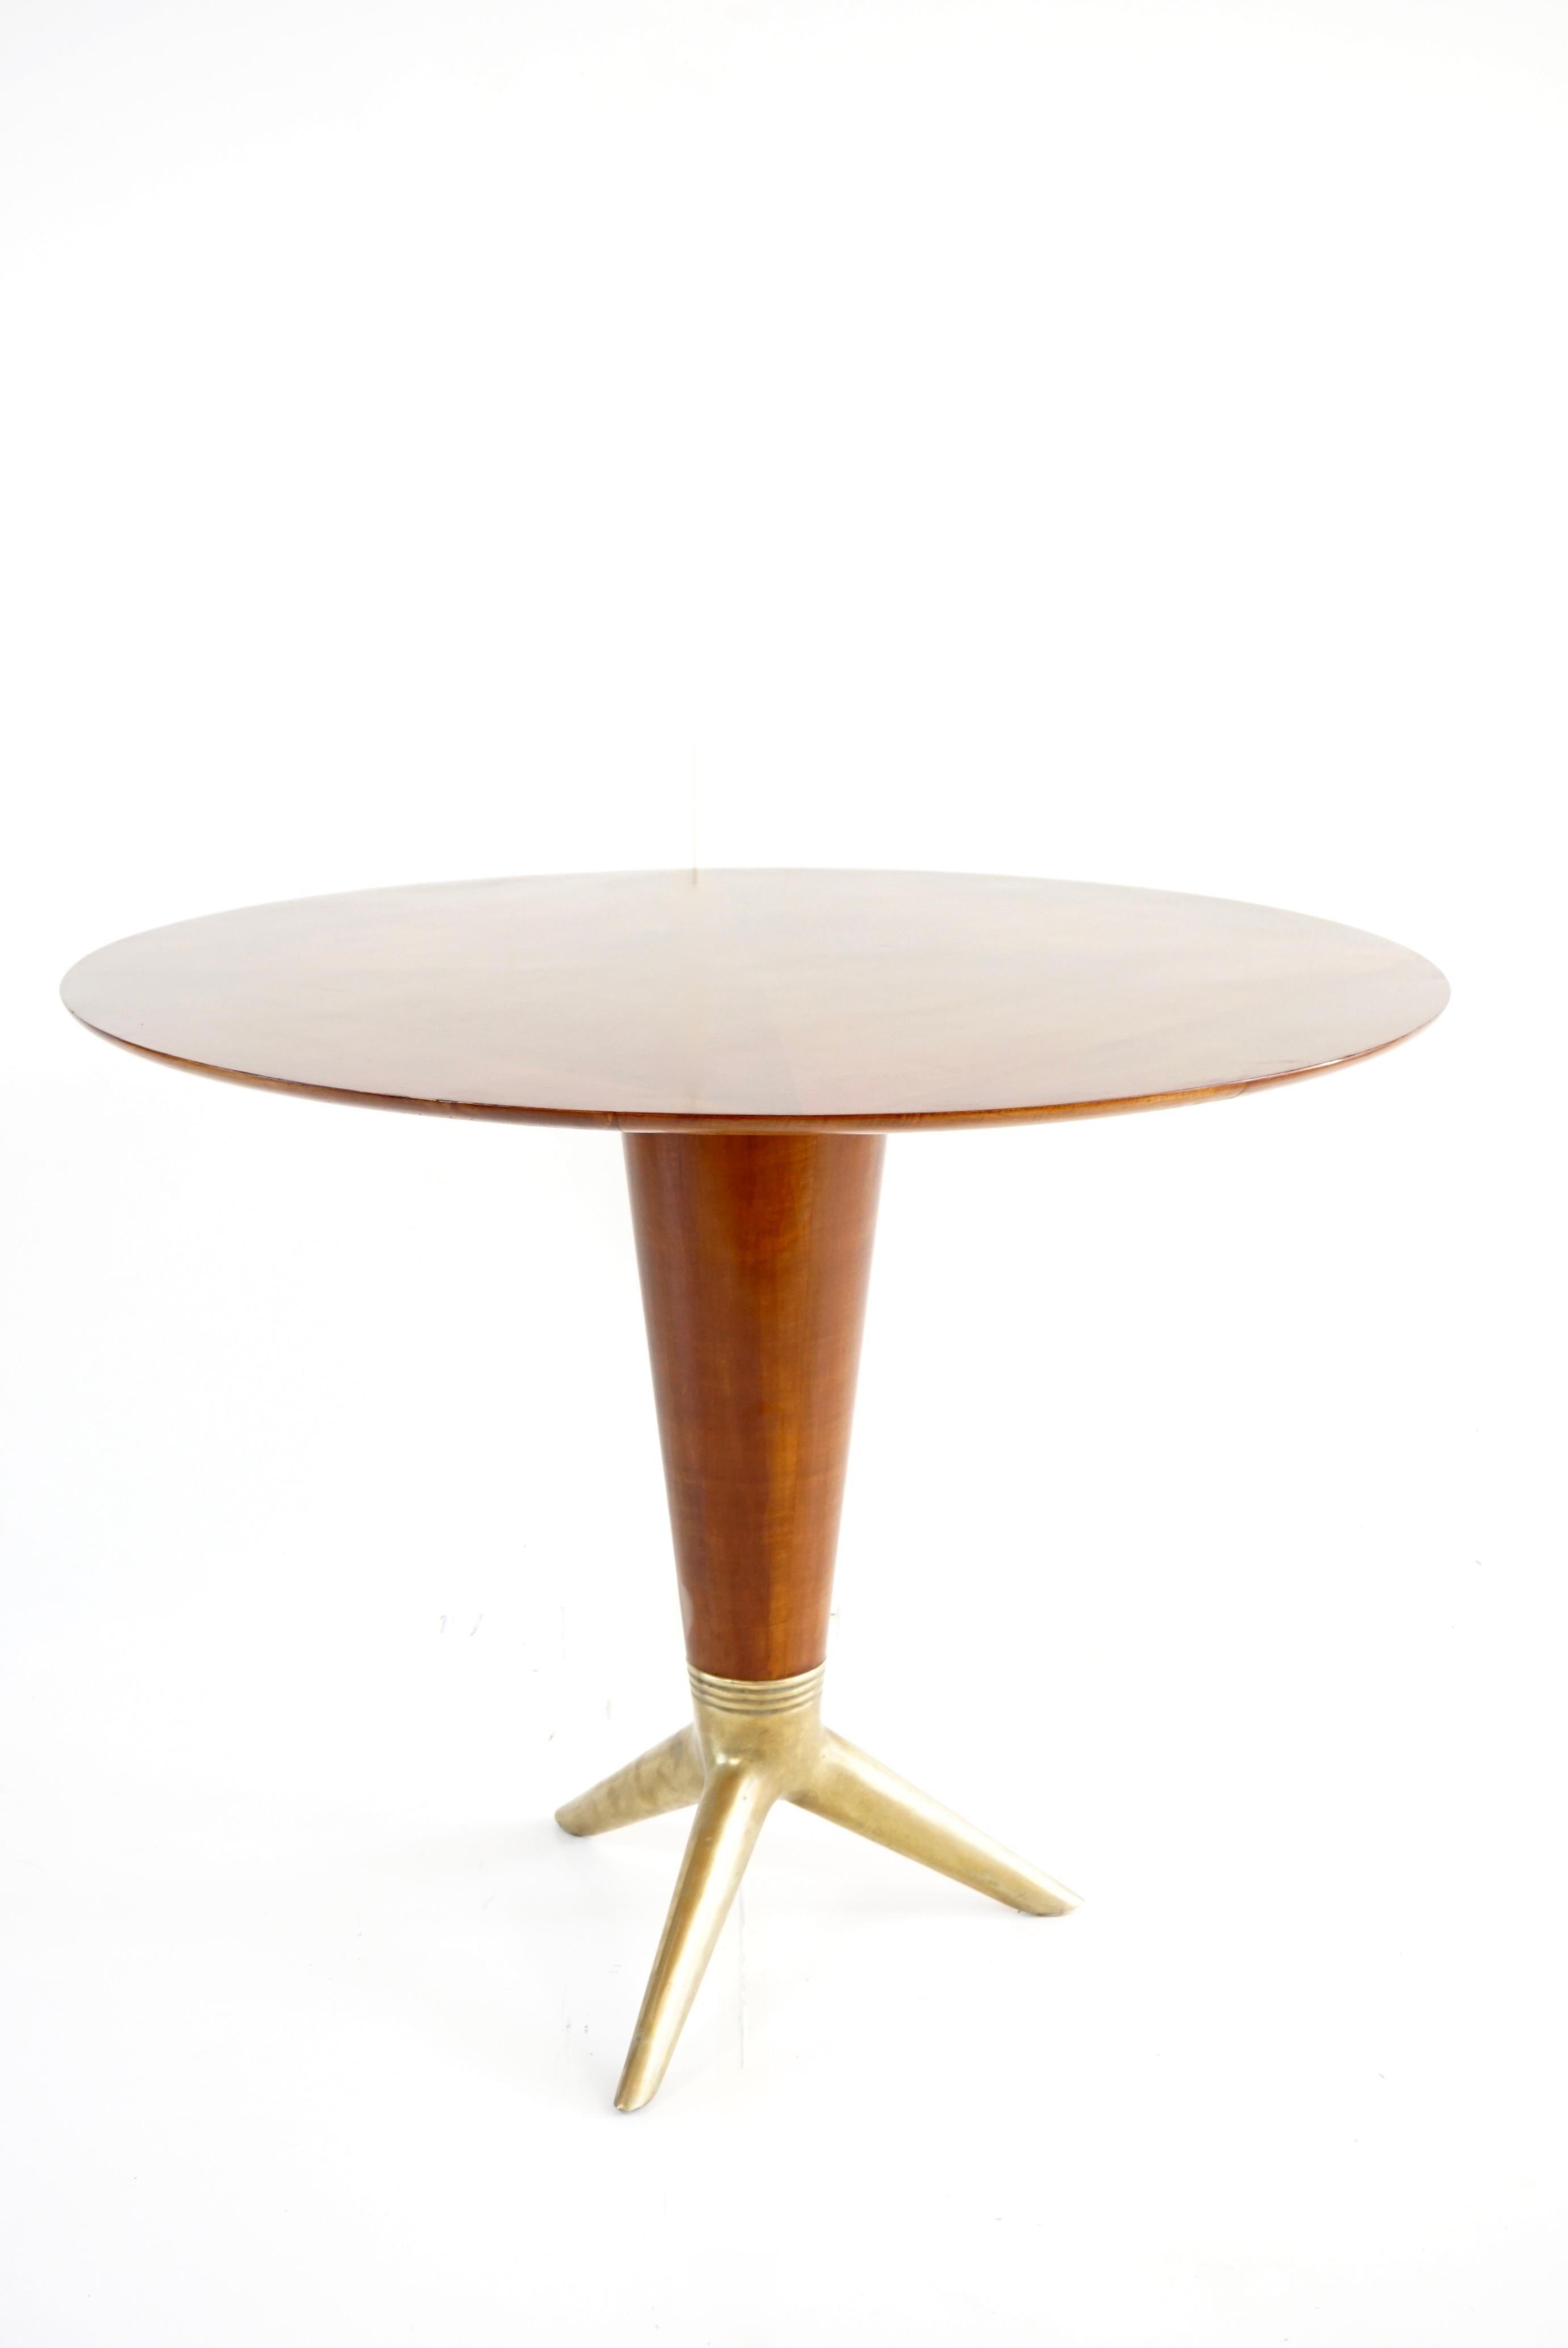 Mid-Century Modern Rare Maple and Brass Round Center Table by I.S.A. Bergamo 1950 For Sale